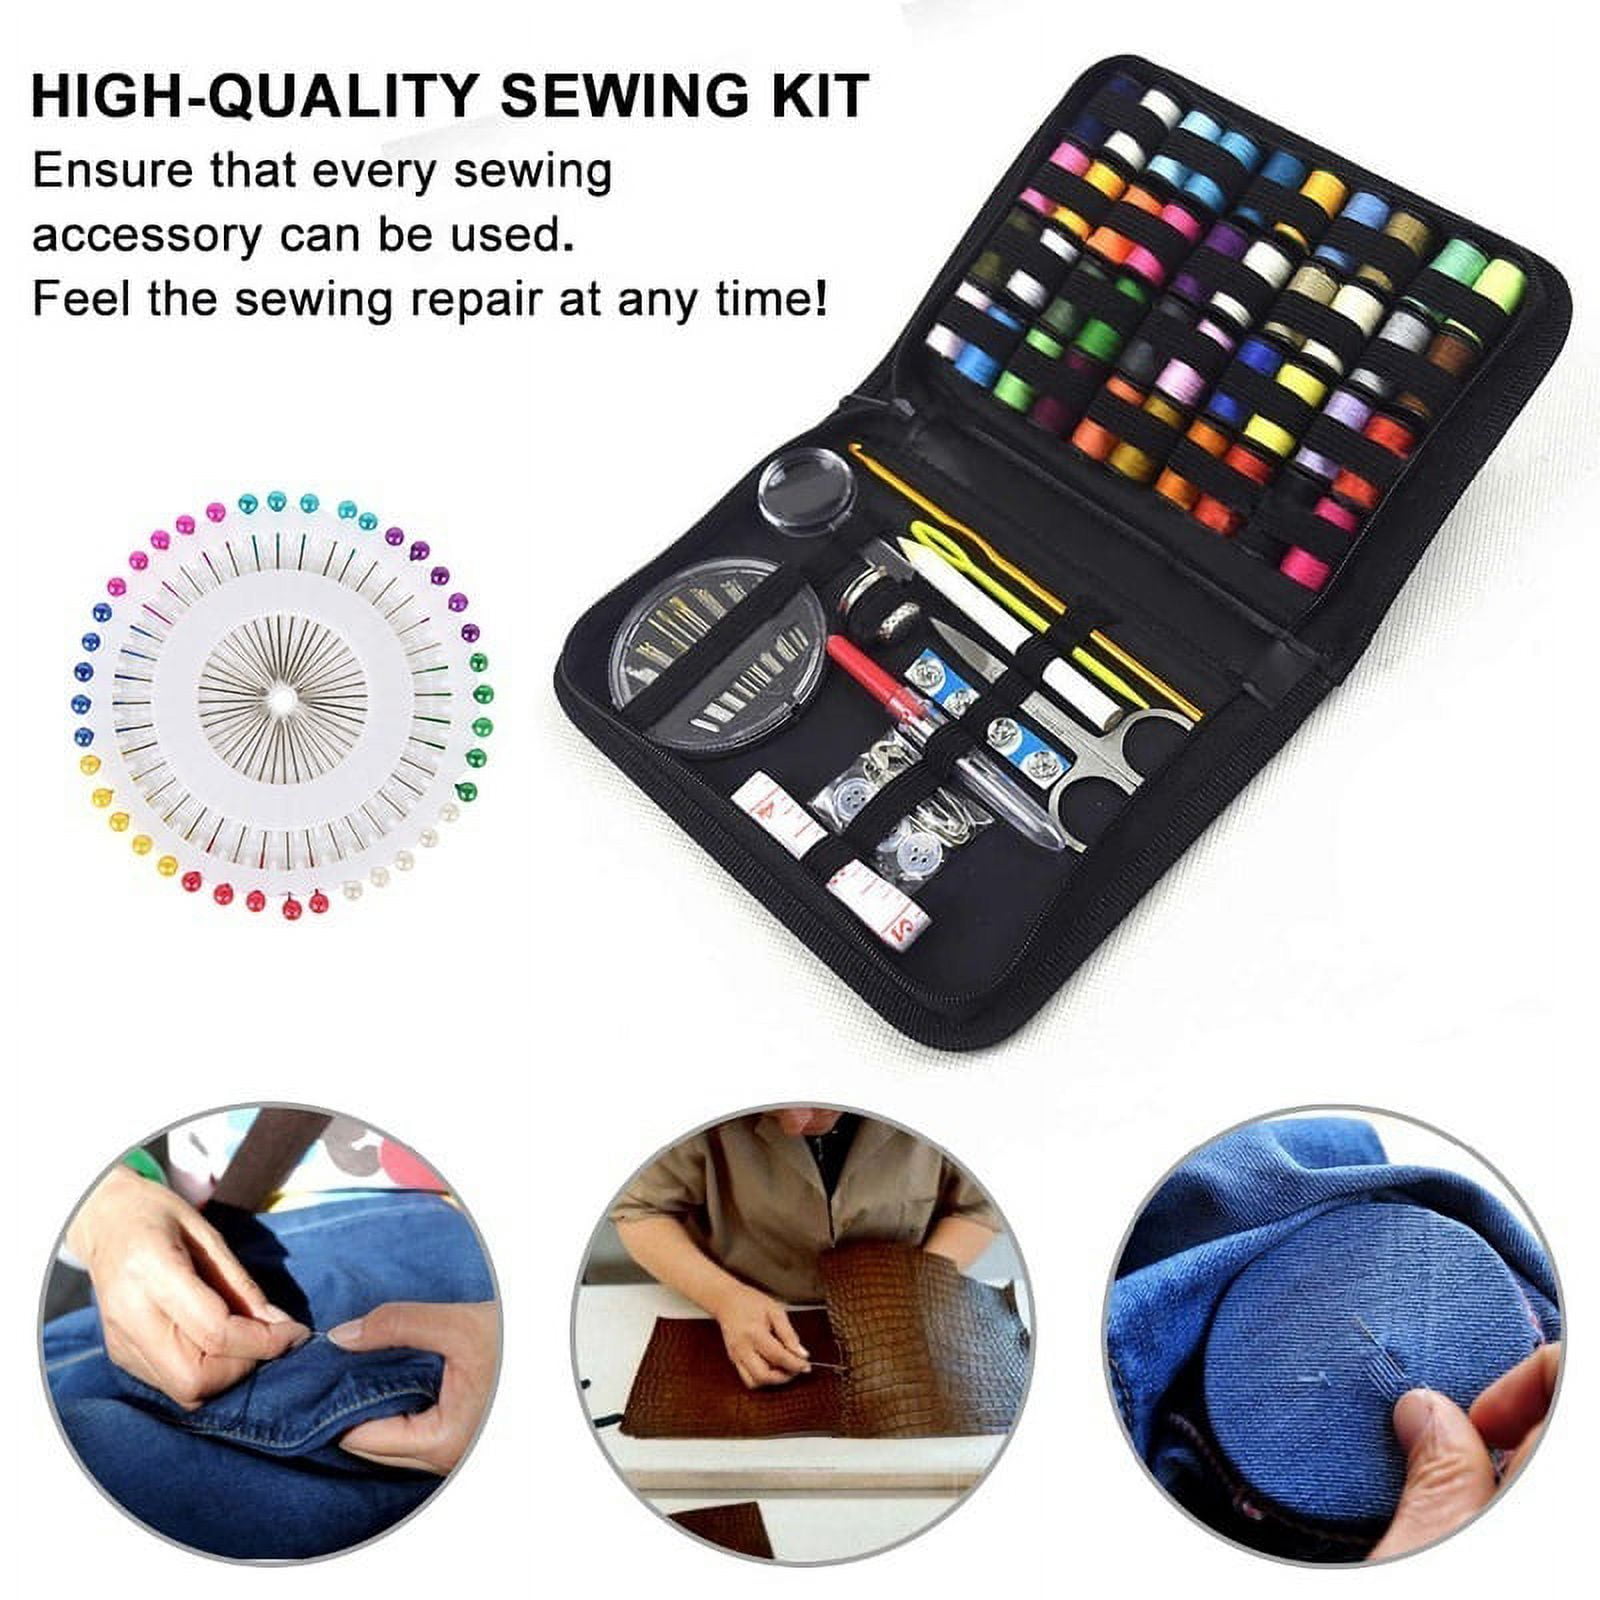 Portable Mini Travel Sewing Kit Organiser With Color Needle Threads Sewing  Kits Sewing Set DIY Home Tools From Flyw201264, $1.38